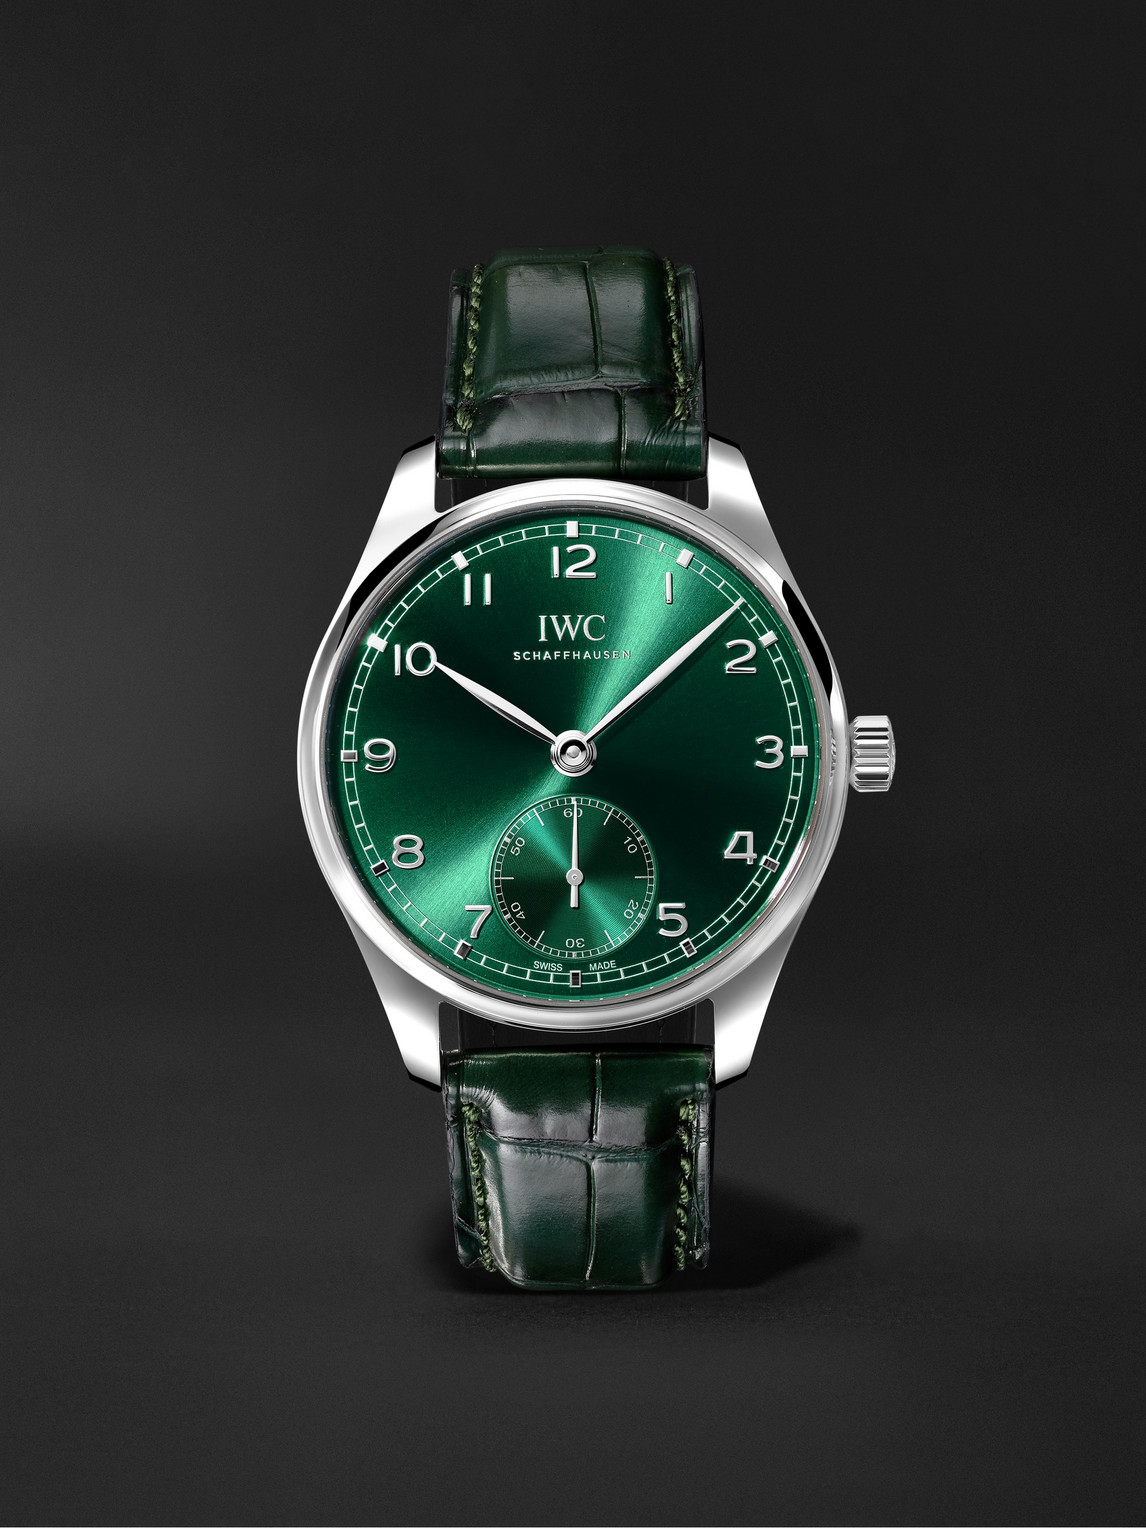 Iwc Schaffhausen Portugieser Automatic Chronograph 40mm Stainless Steel And Alligator Watch, Ref. No. Iw358310 In Green